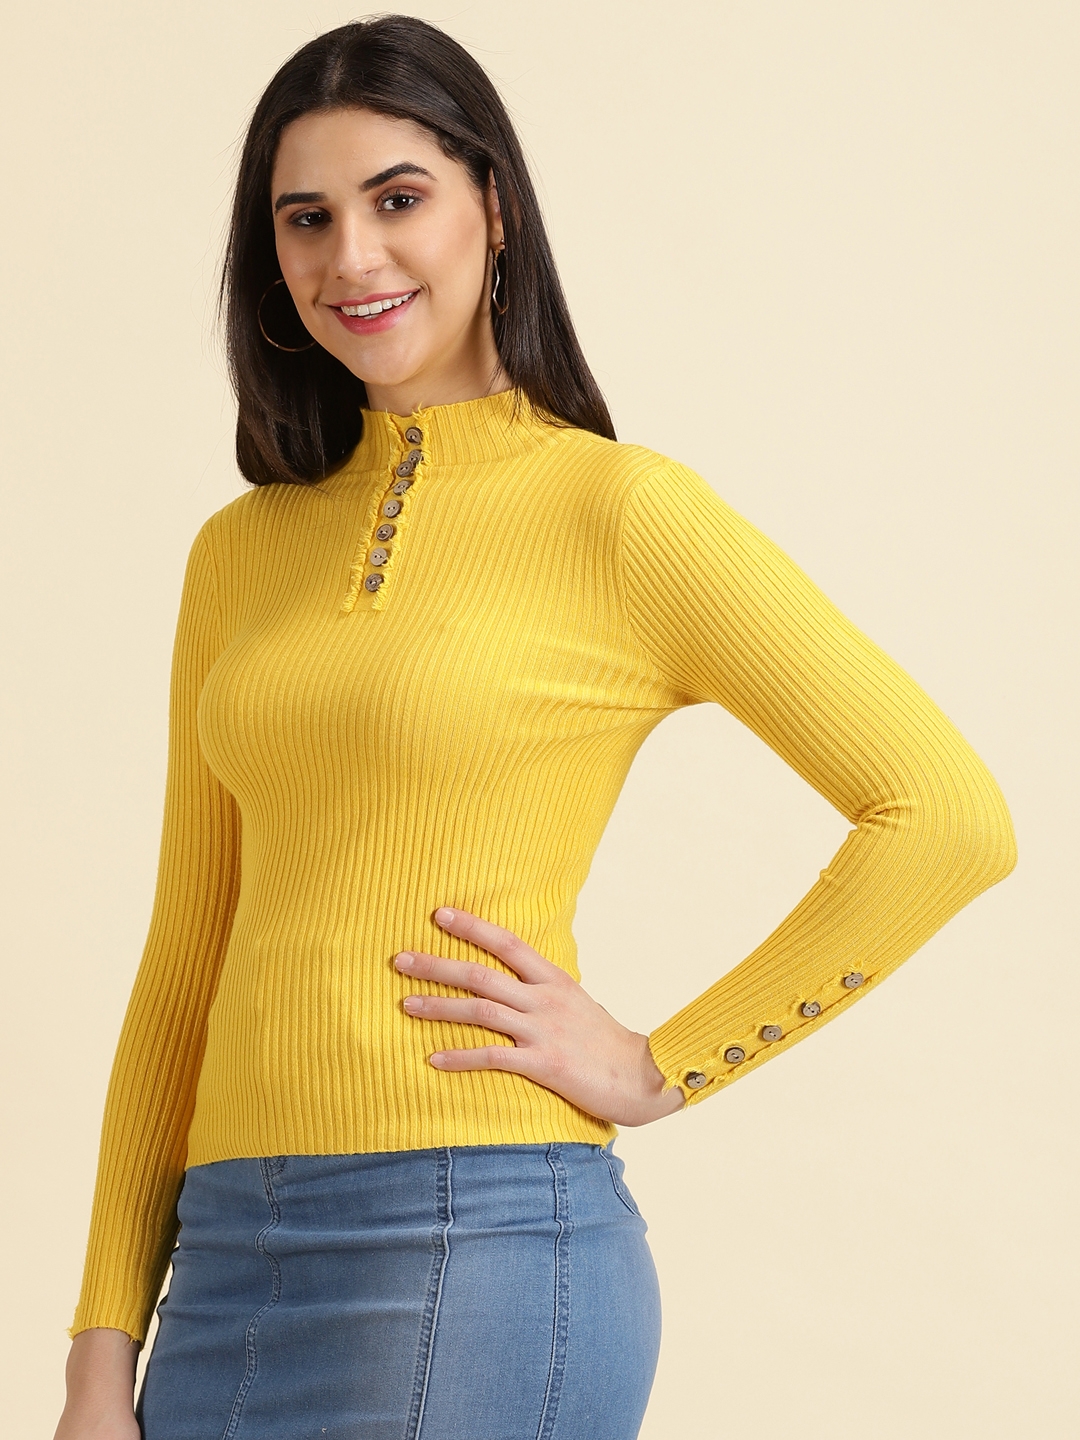 Showoff | SHOWOFF Women's High Neck Solid Yellow Fitted Regular Top 2